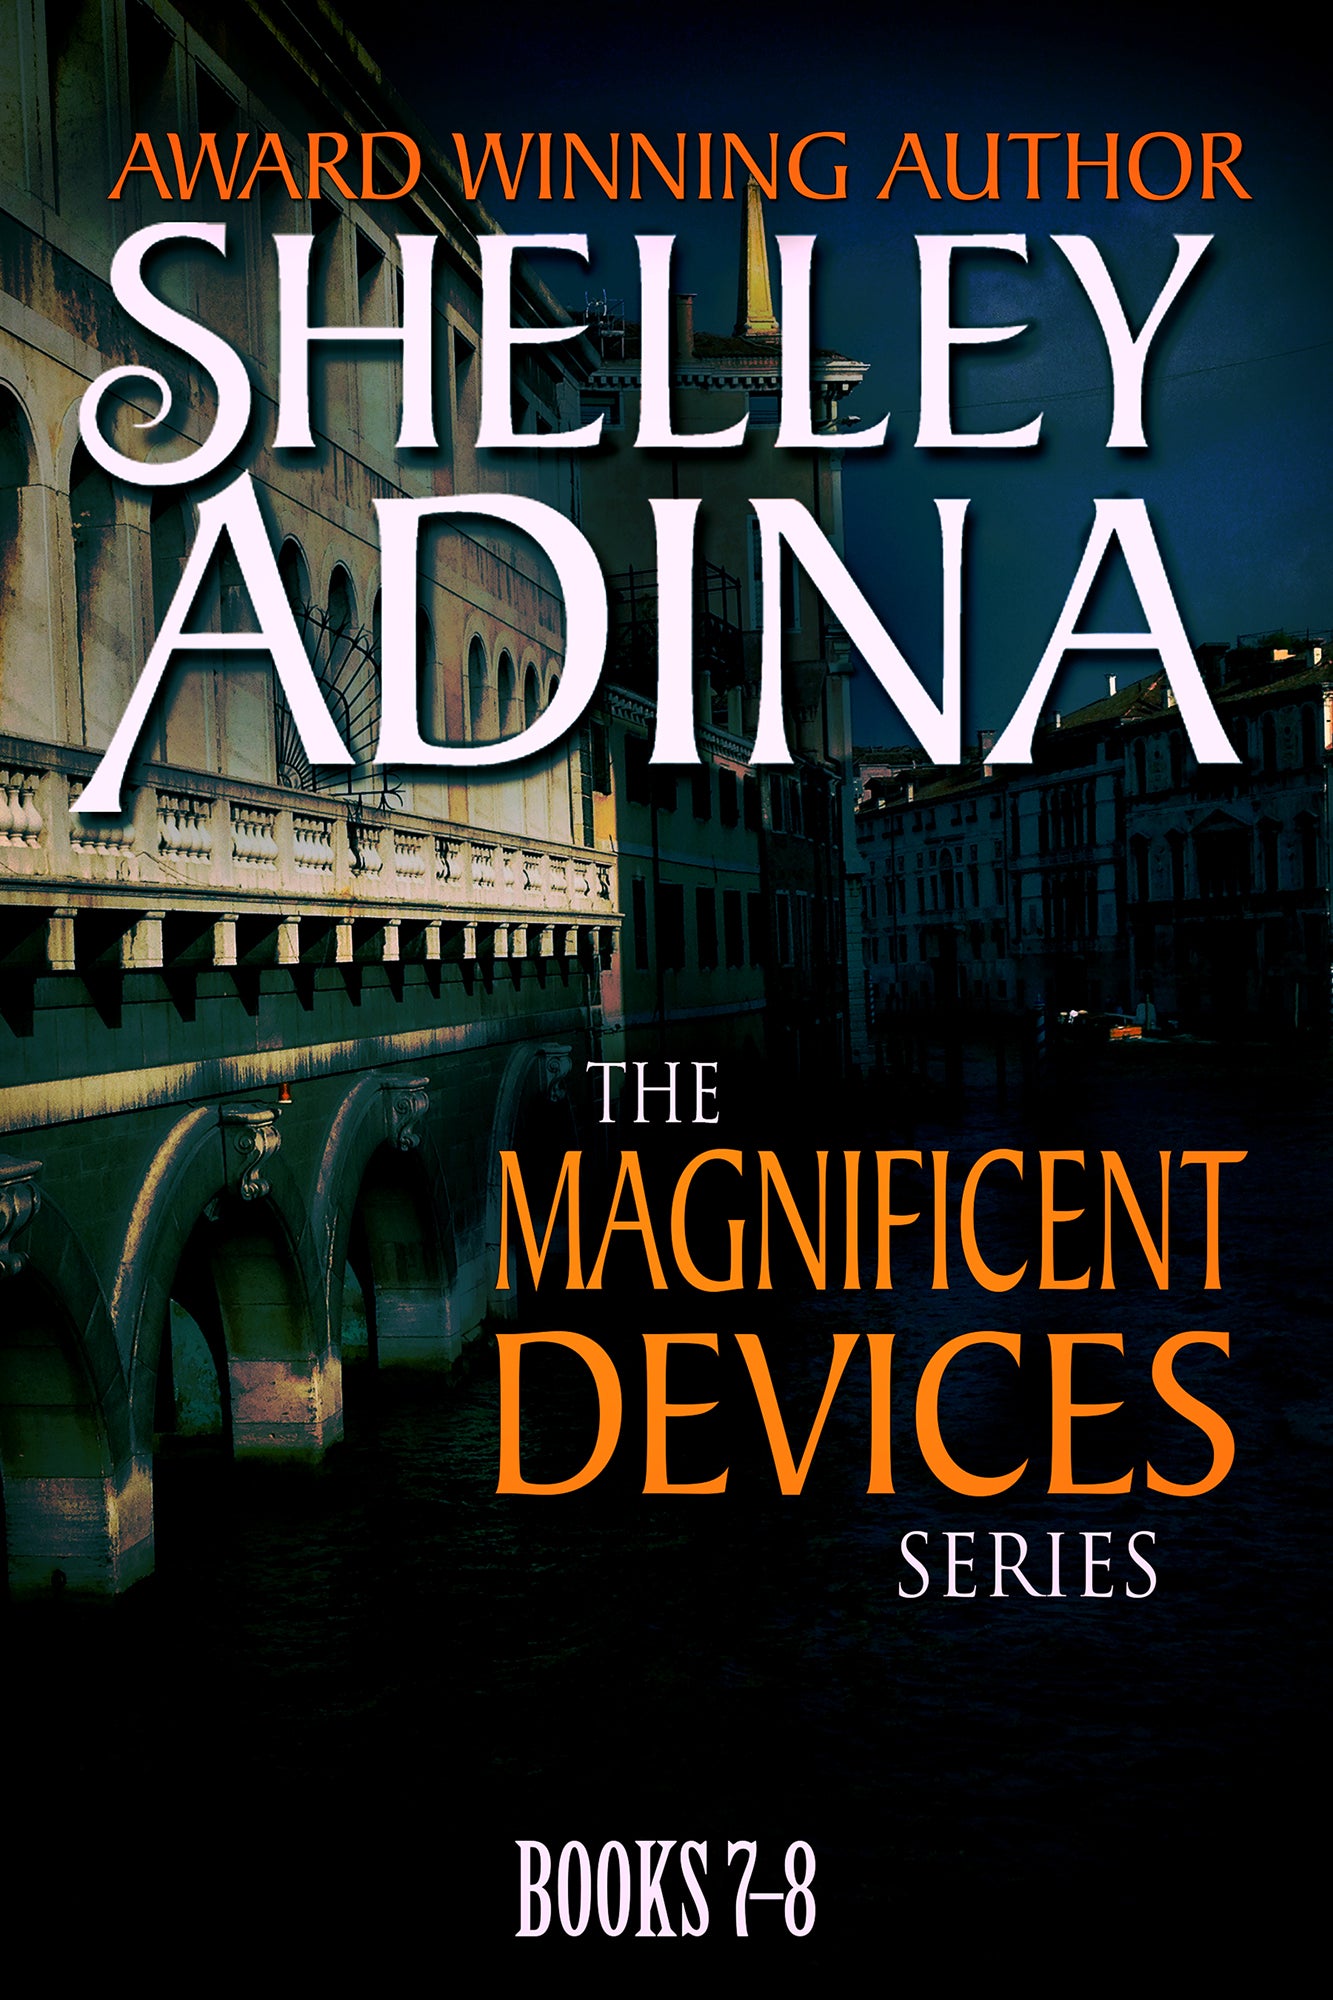 Magnificent Devices Books 7-8 written by Shelley Adina